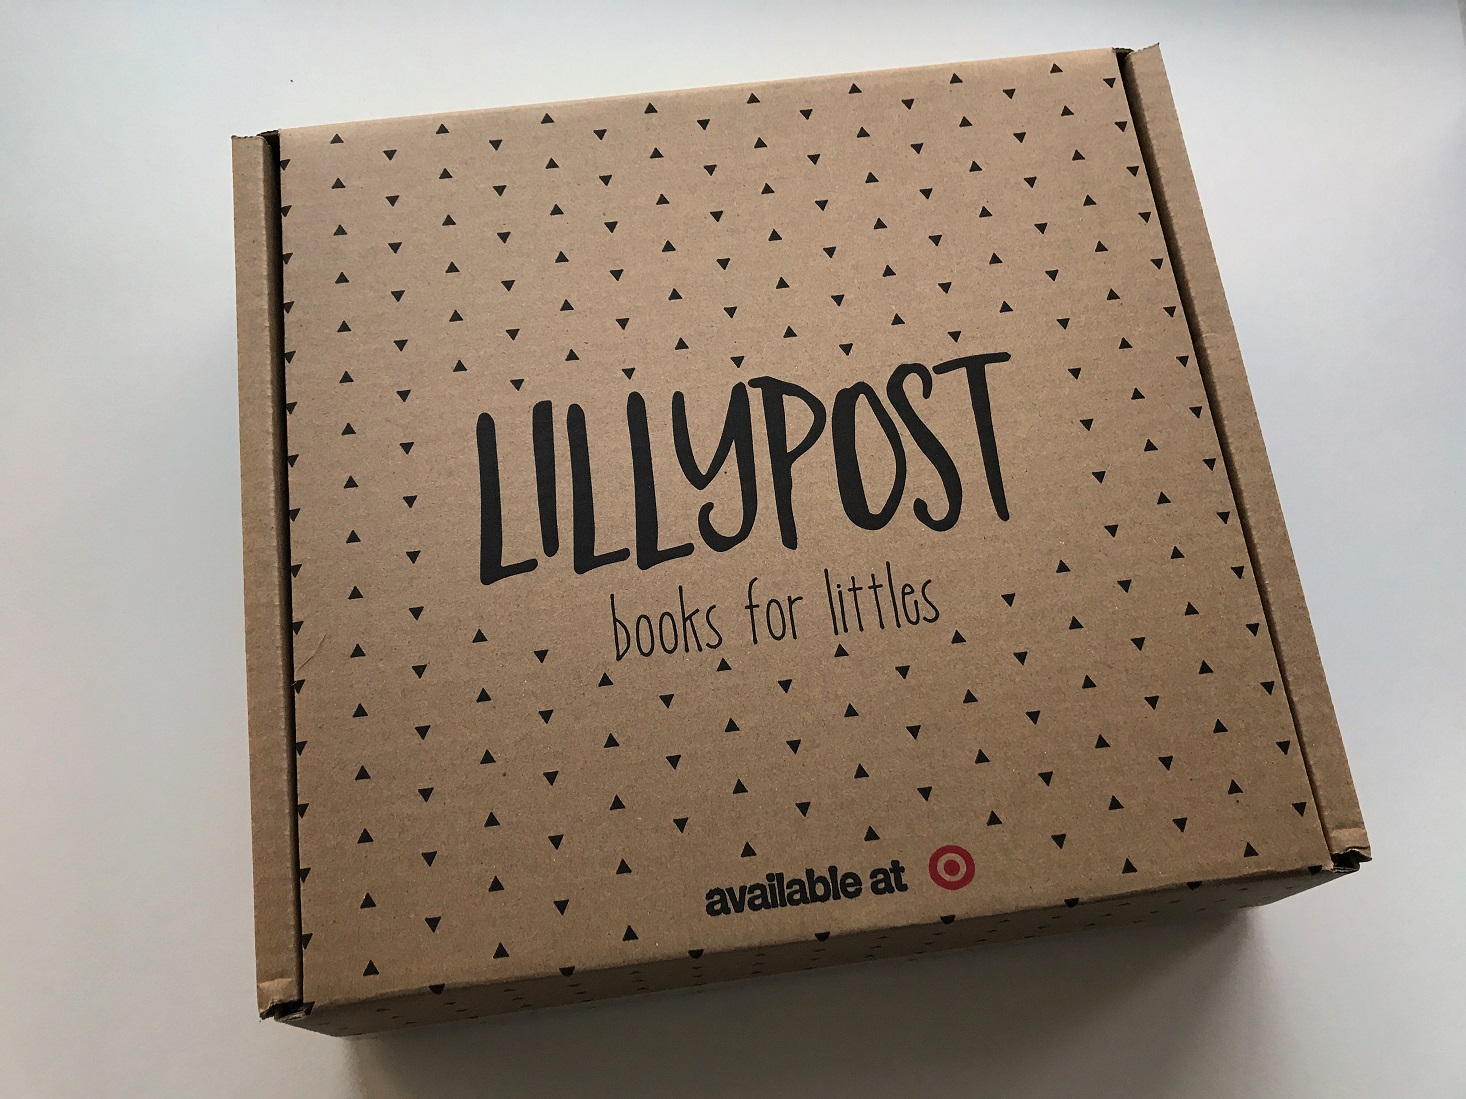 Lillypost Picture Book Box Review + Coupon – December 2017